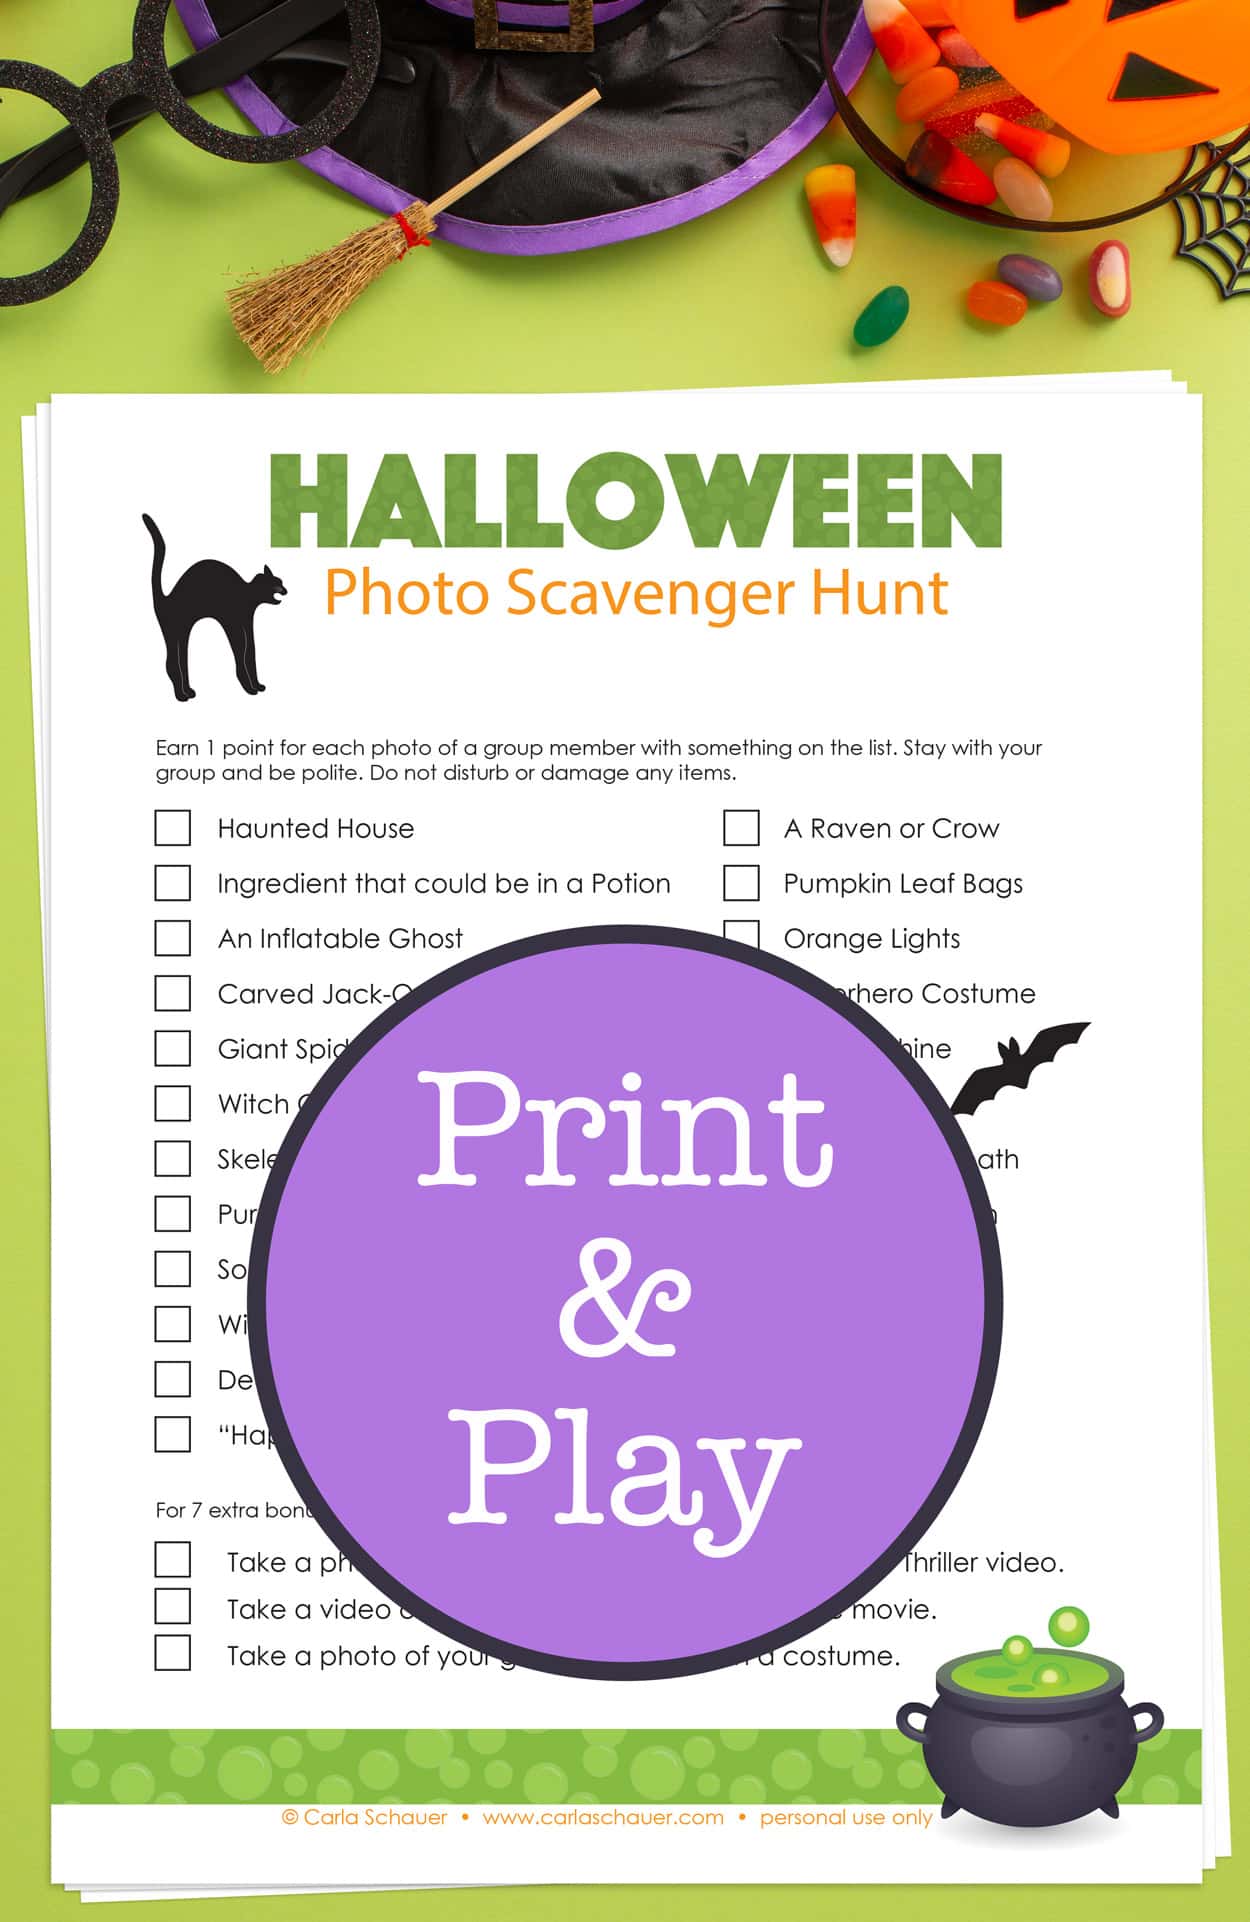 A green and black Halloween Scavenger Hunt list sits on a bright green background. At the top of the image are a variety of Halloween props, including a witch's hat, round eyeglasses, and an orange plastic pumpkin bucket with Halloween candy.